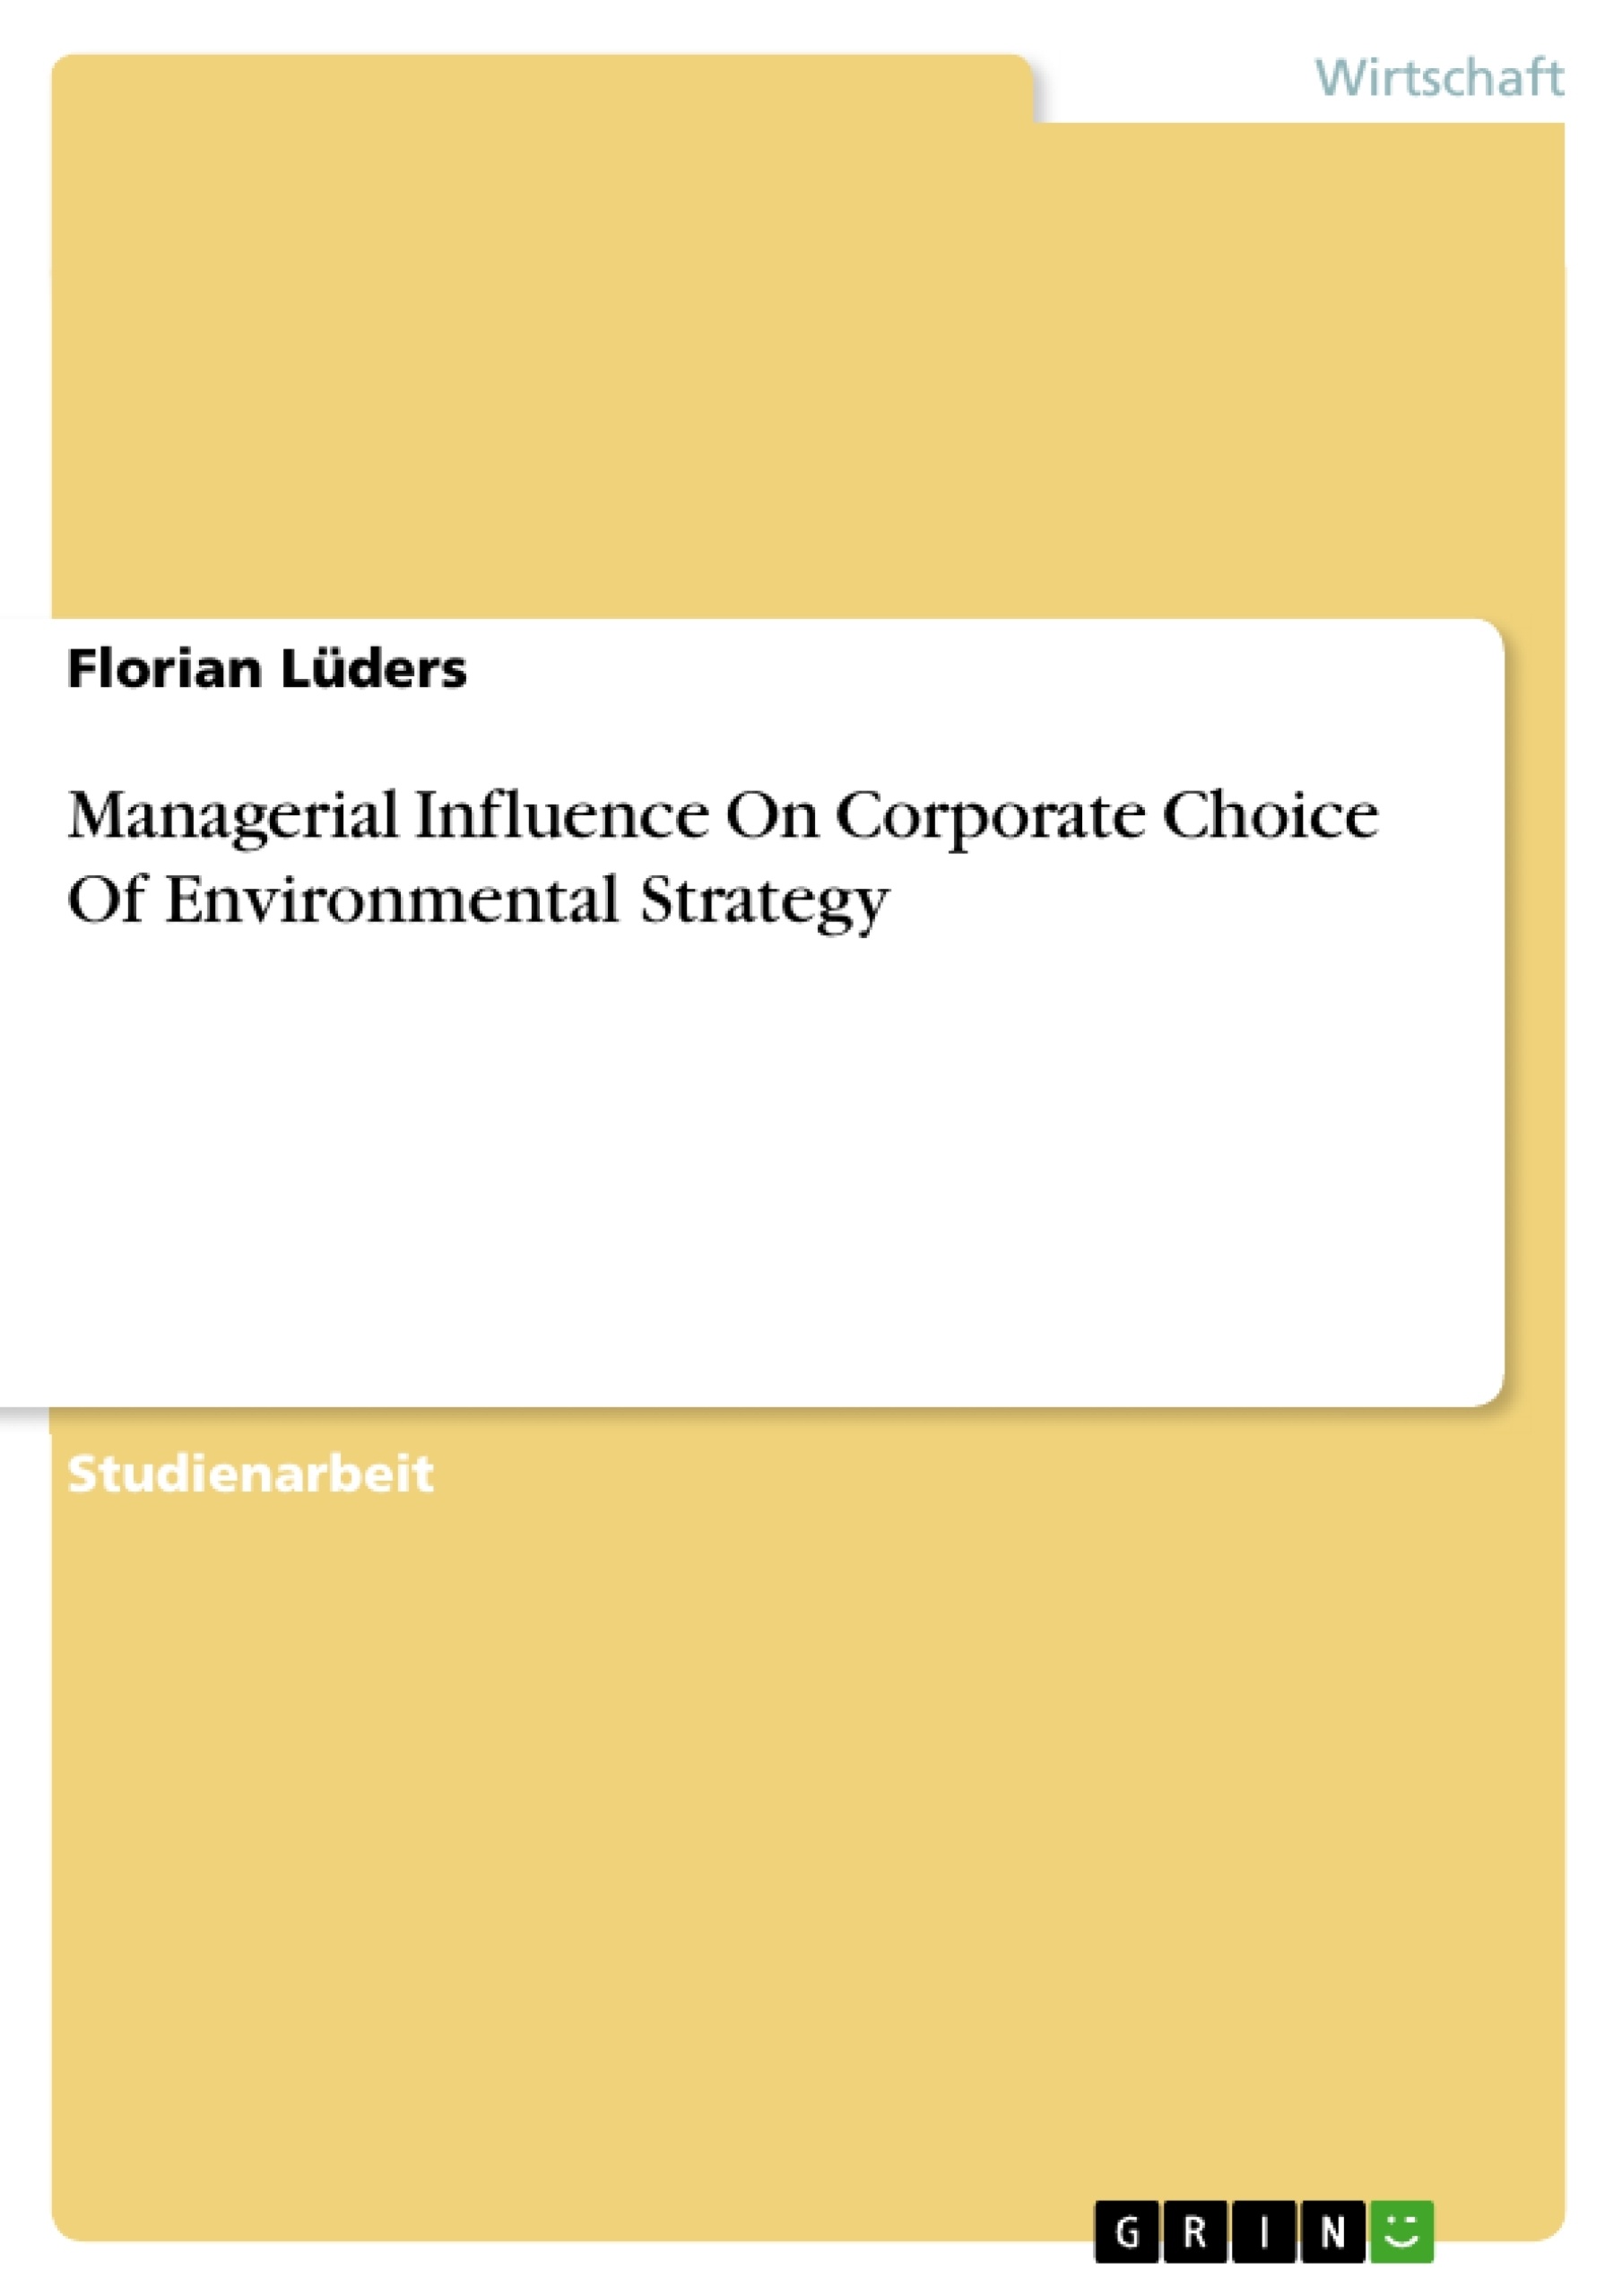 Titel: Managerial Influence On Corporate Choice Of Environmental Strategy